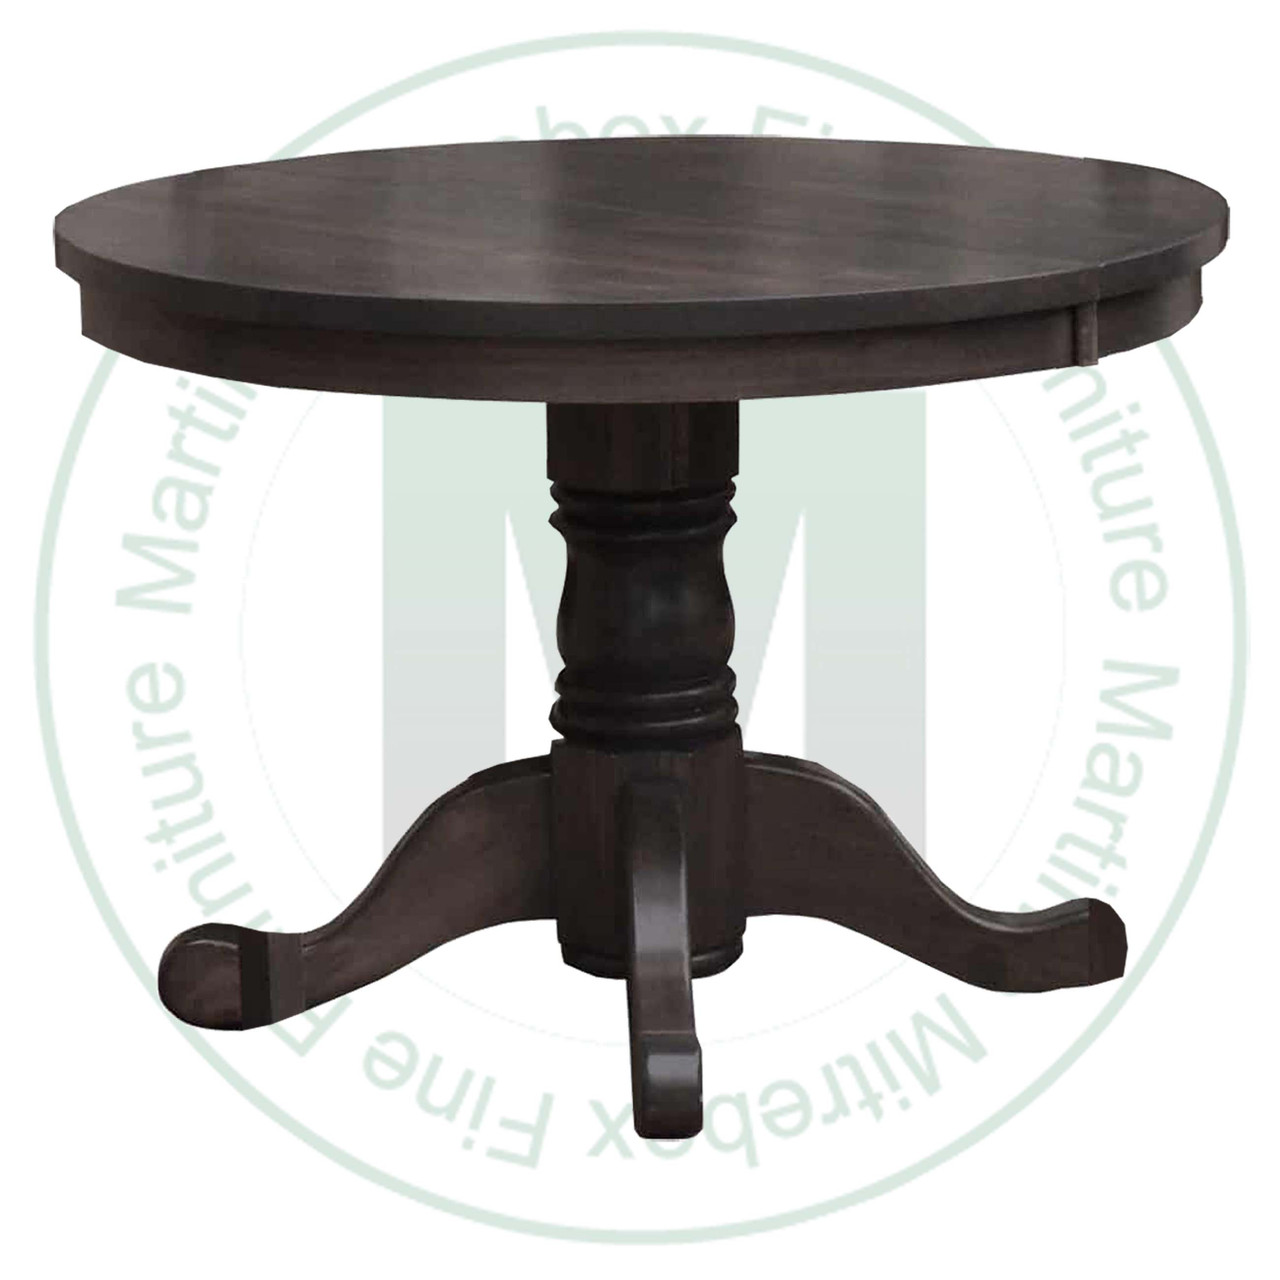 Maple Nith River Single Pedestal Round Solid Top Table 42''D x 42''W x 30''H With 7'' Pedestal